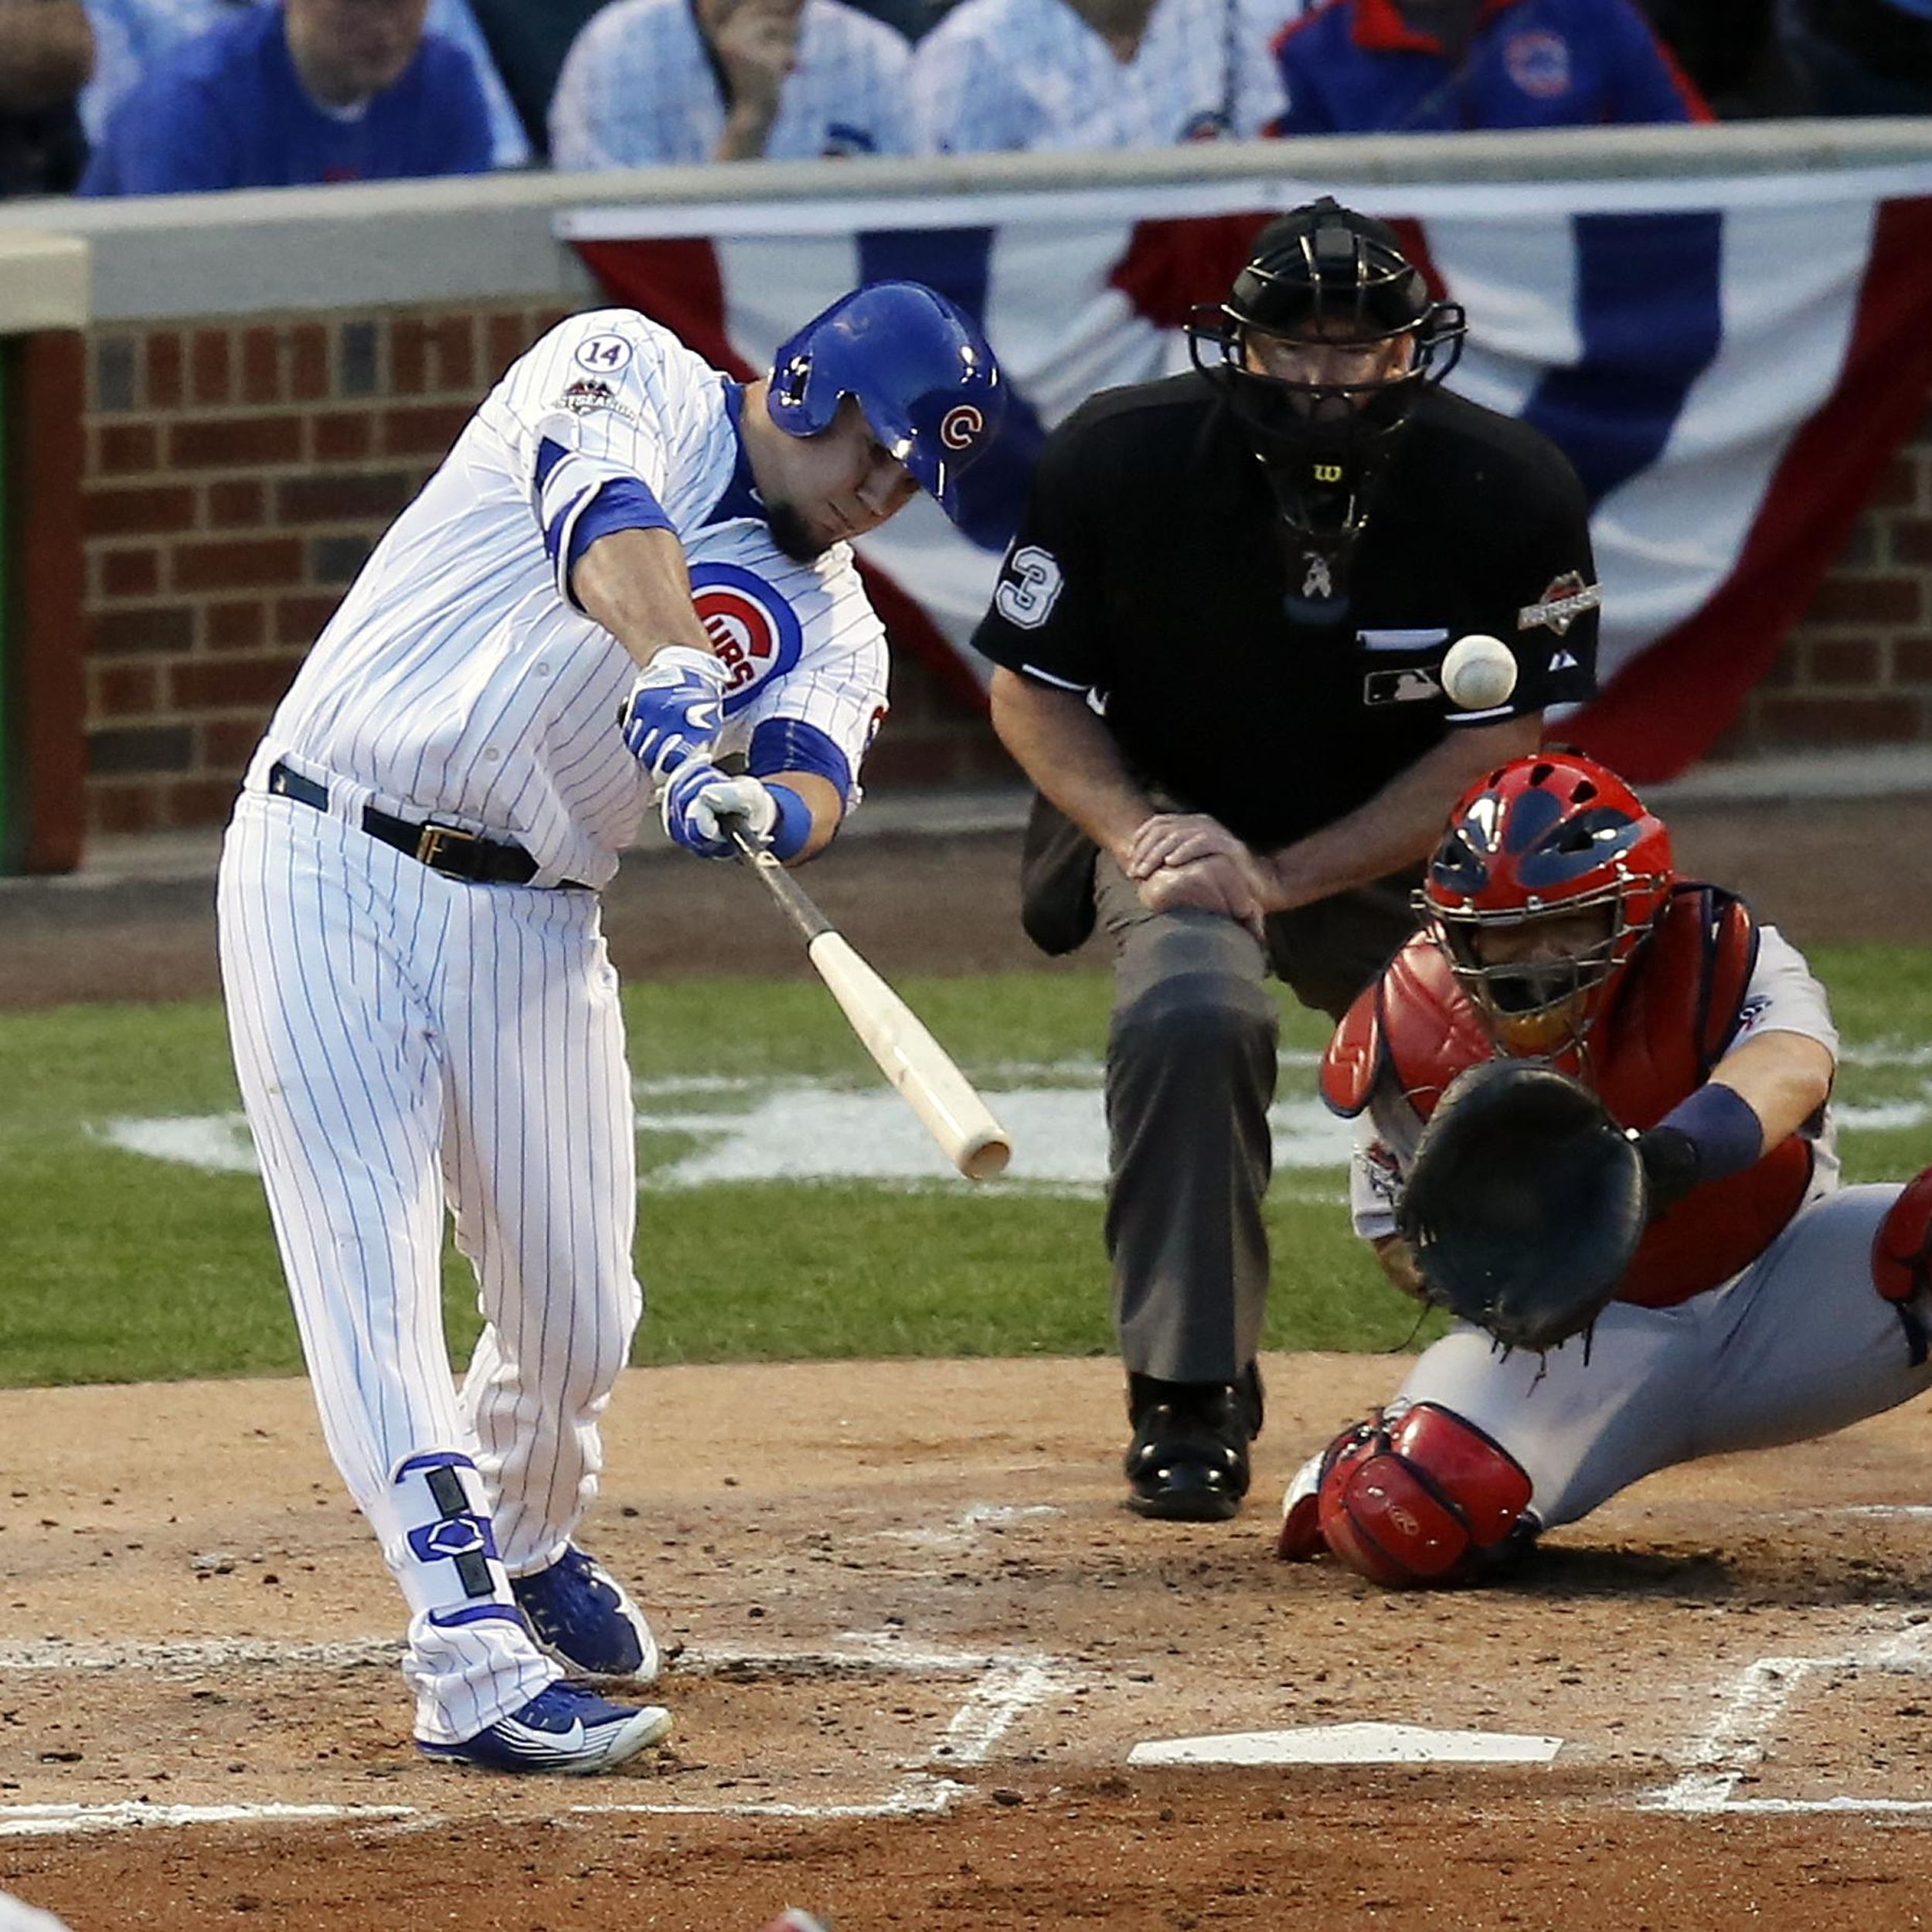 Anthony Rizzo BASHES THREE HOME RUNS!! First time in his career he